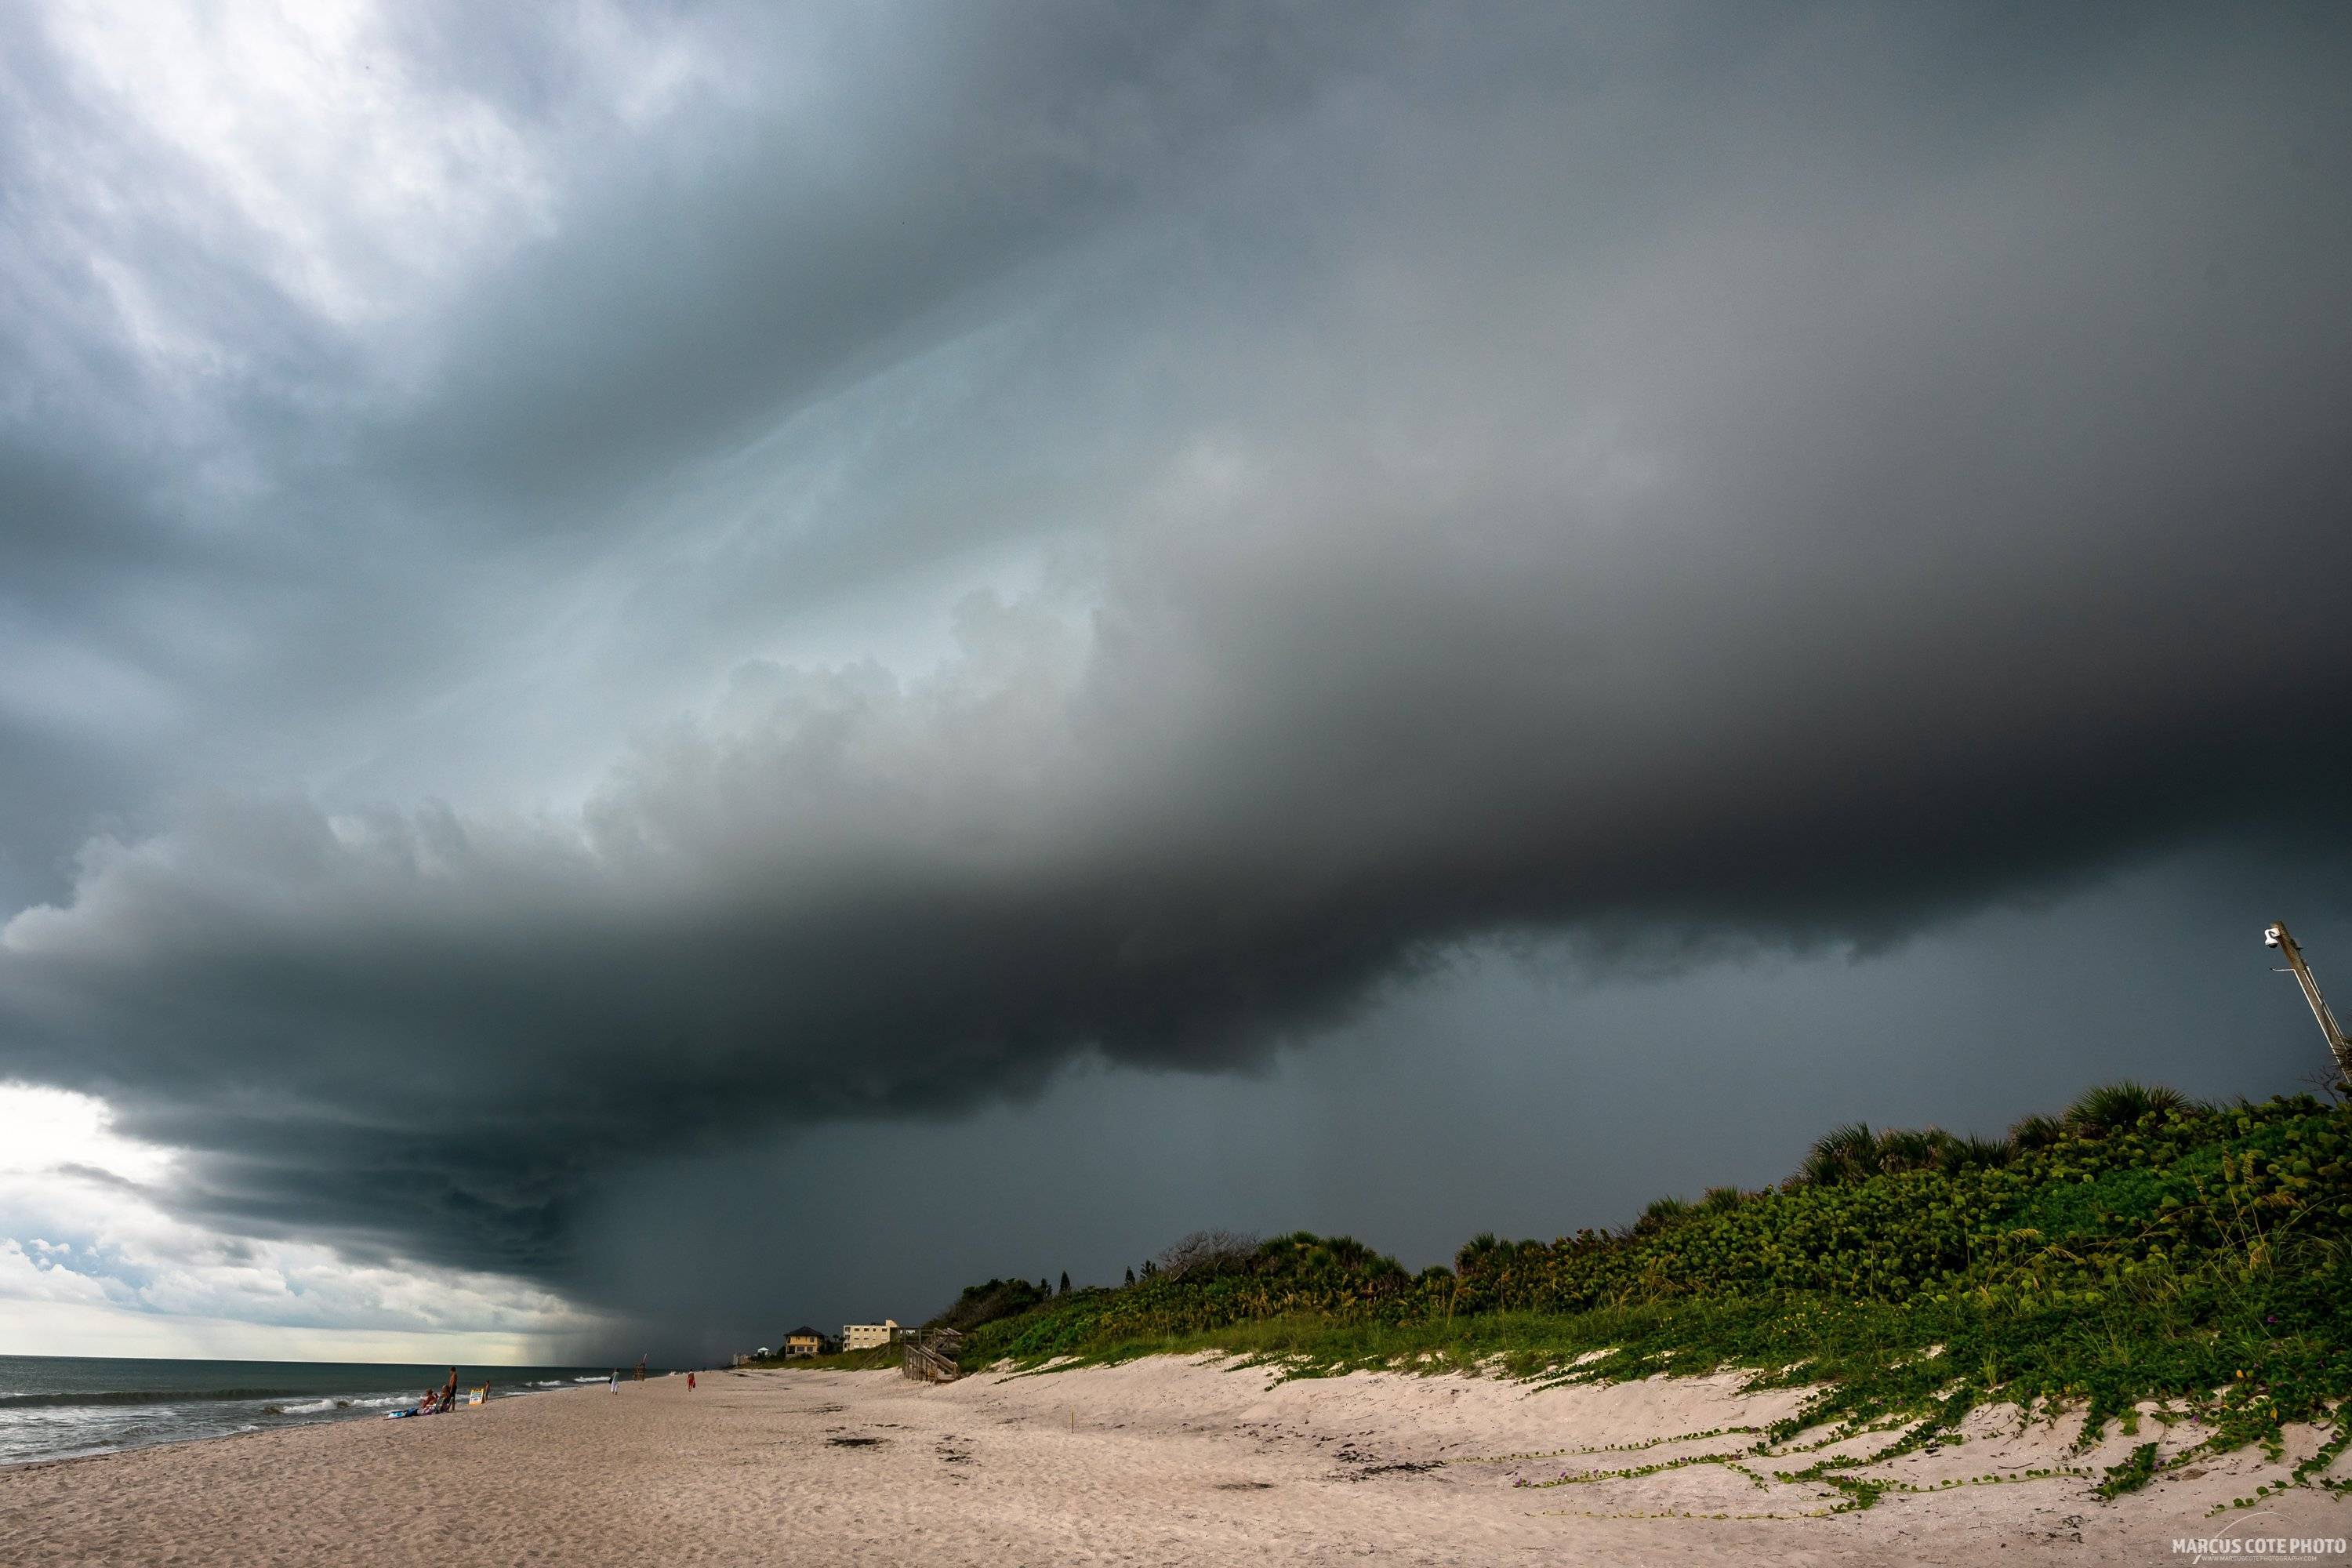 Thunderstorms at Satellite Beach, FL. by Marcus Cote @marcuscotephoto